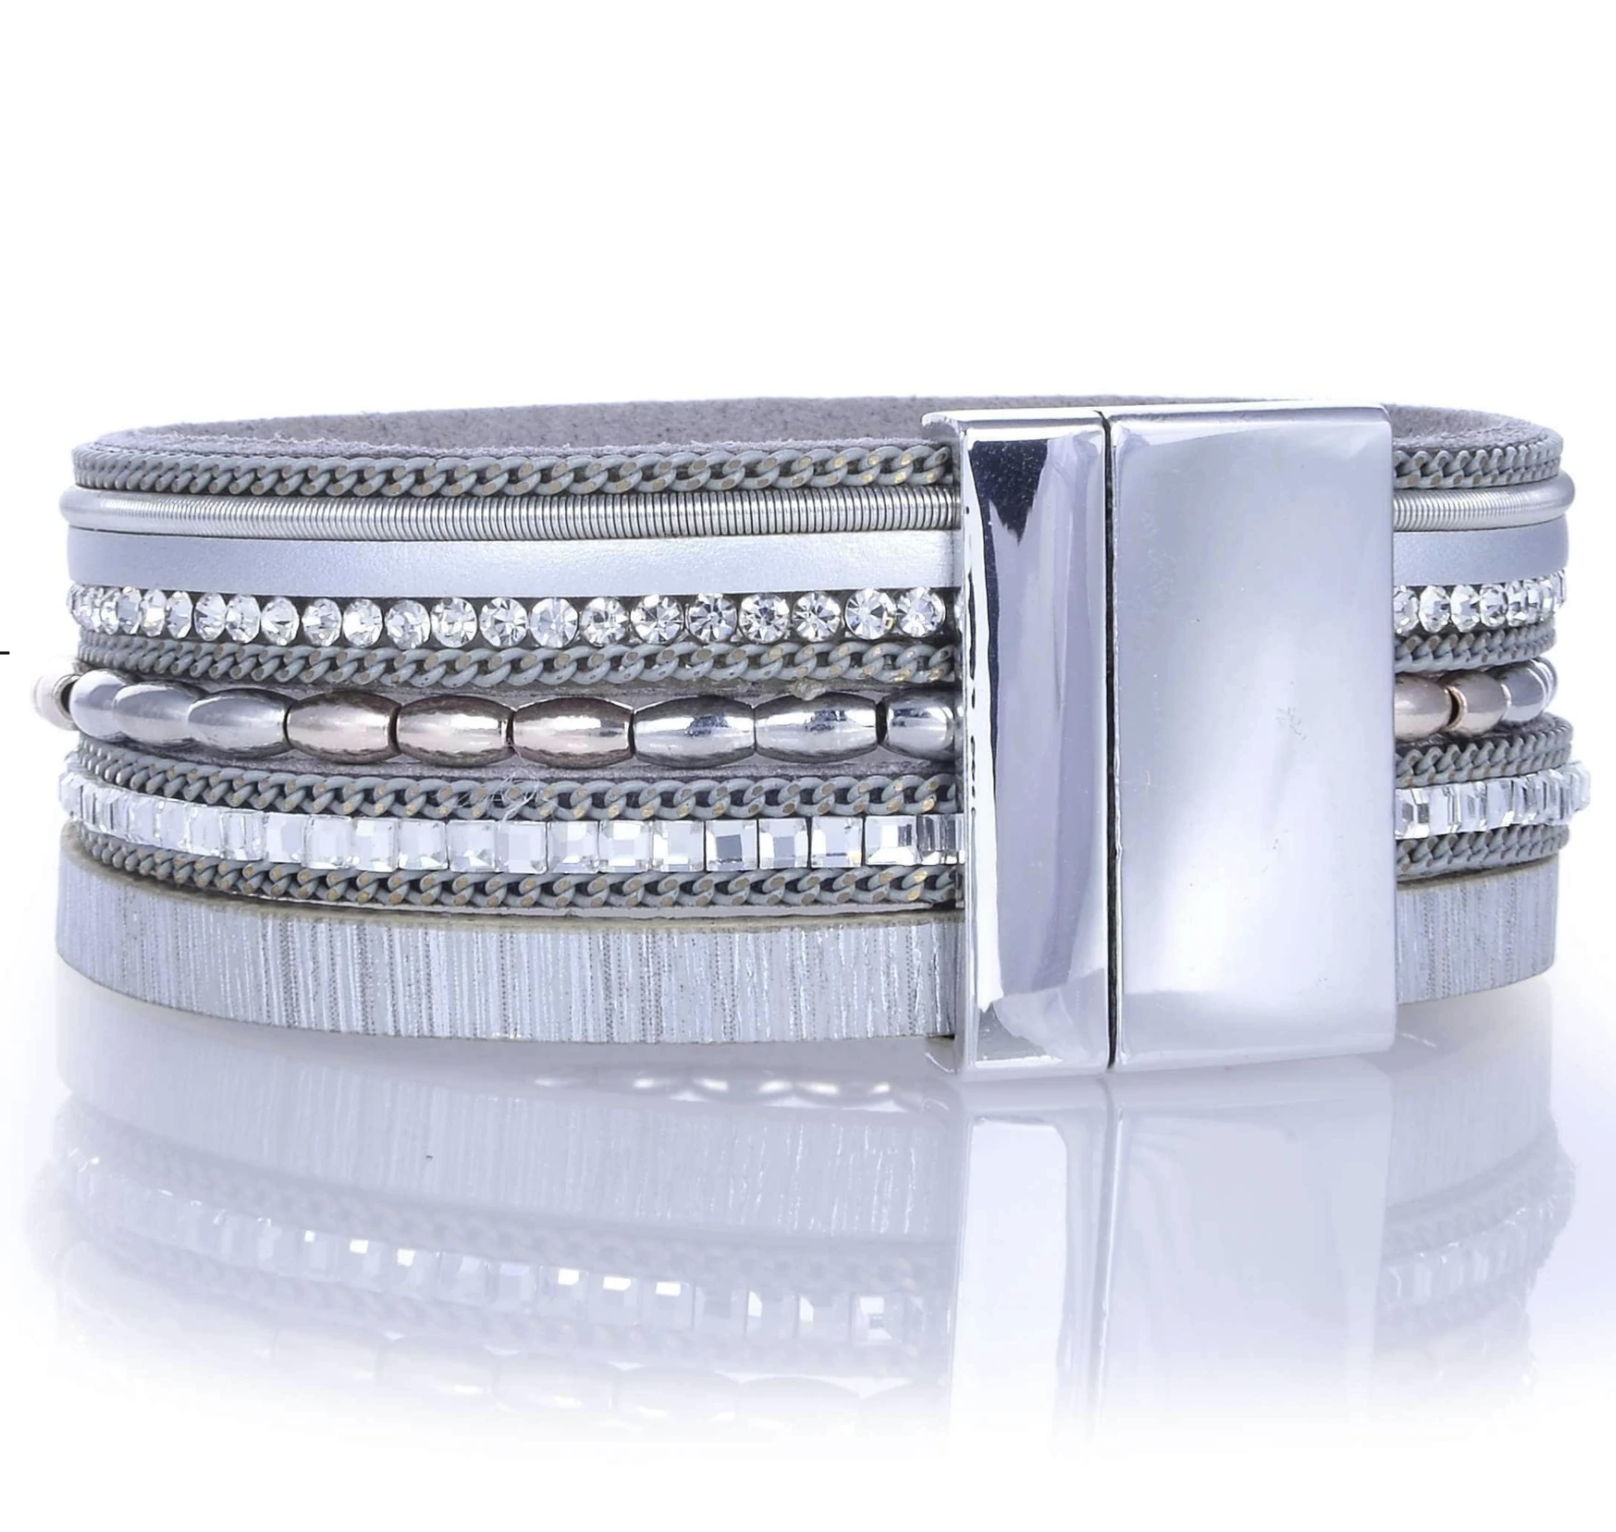 Metallic Beads & Silver Leather Multiple Wrap Bracelet With Magnetic Clasp